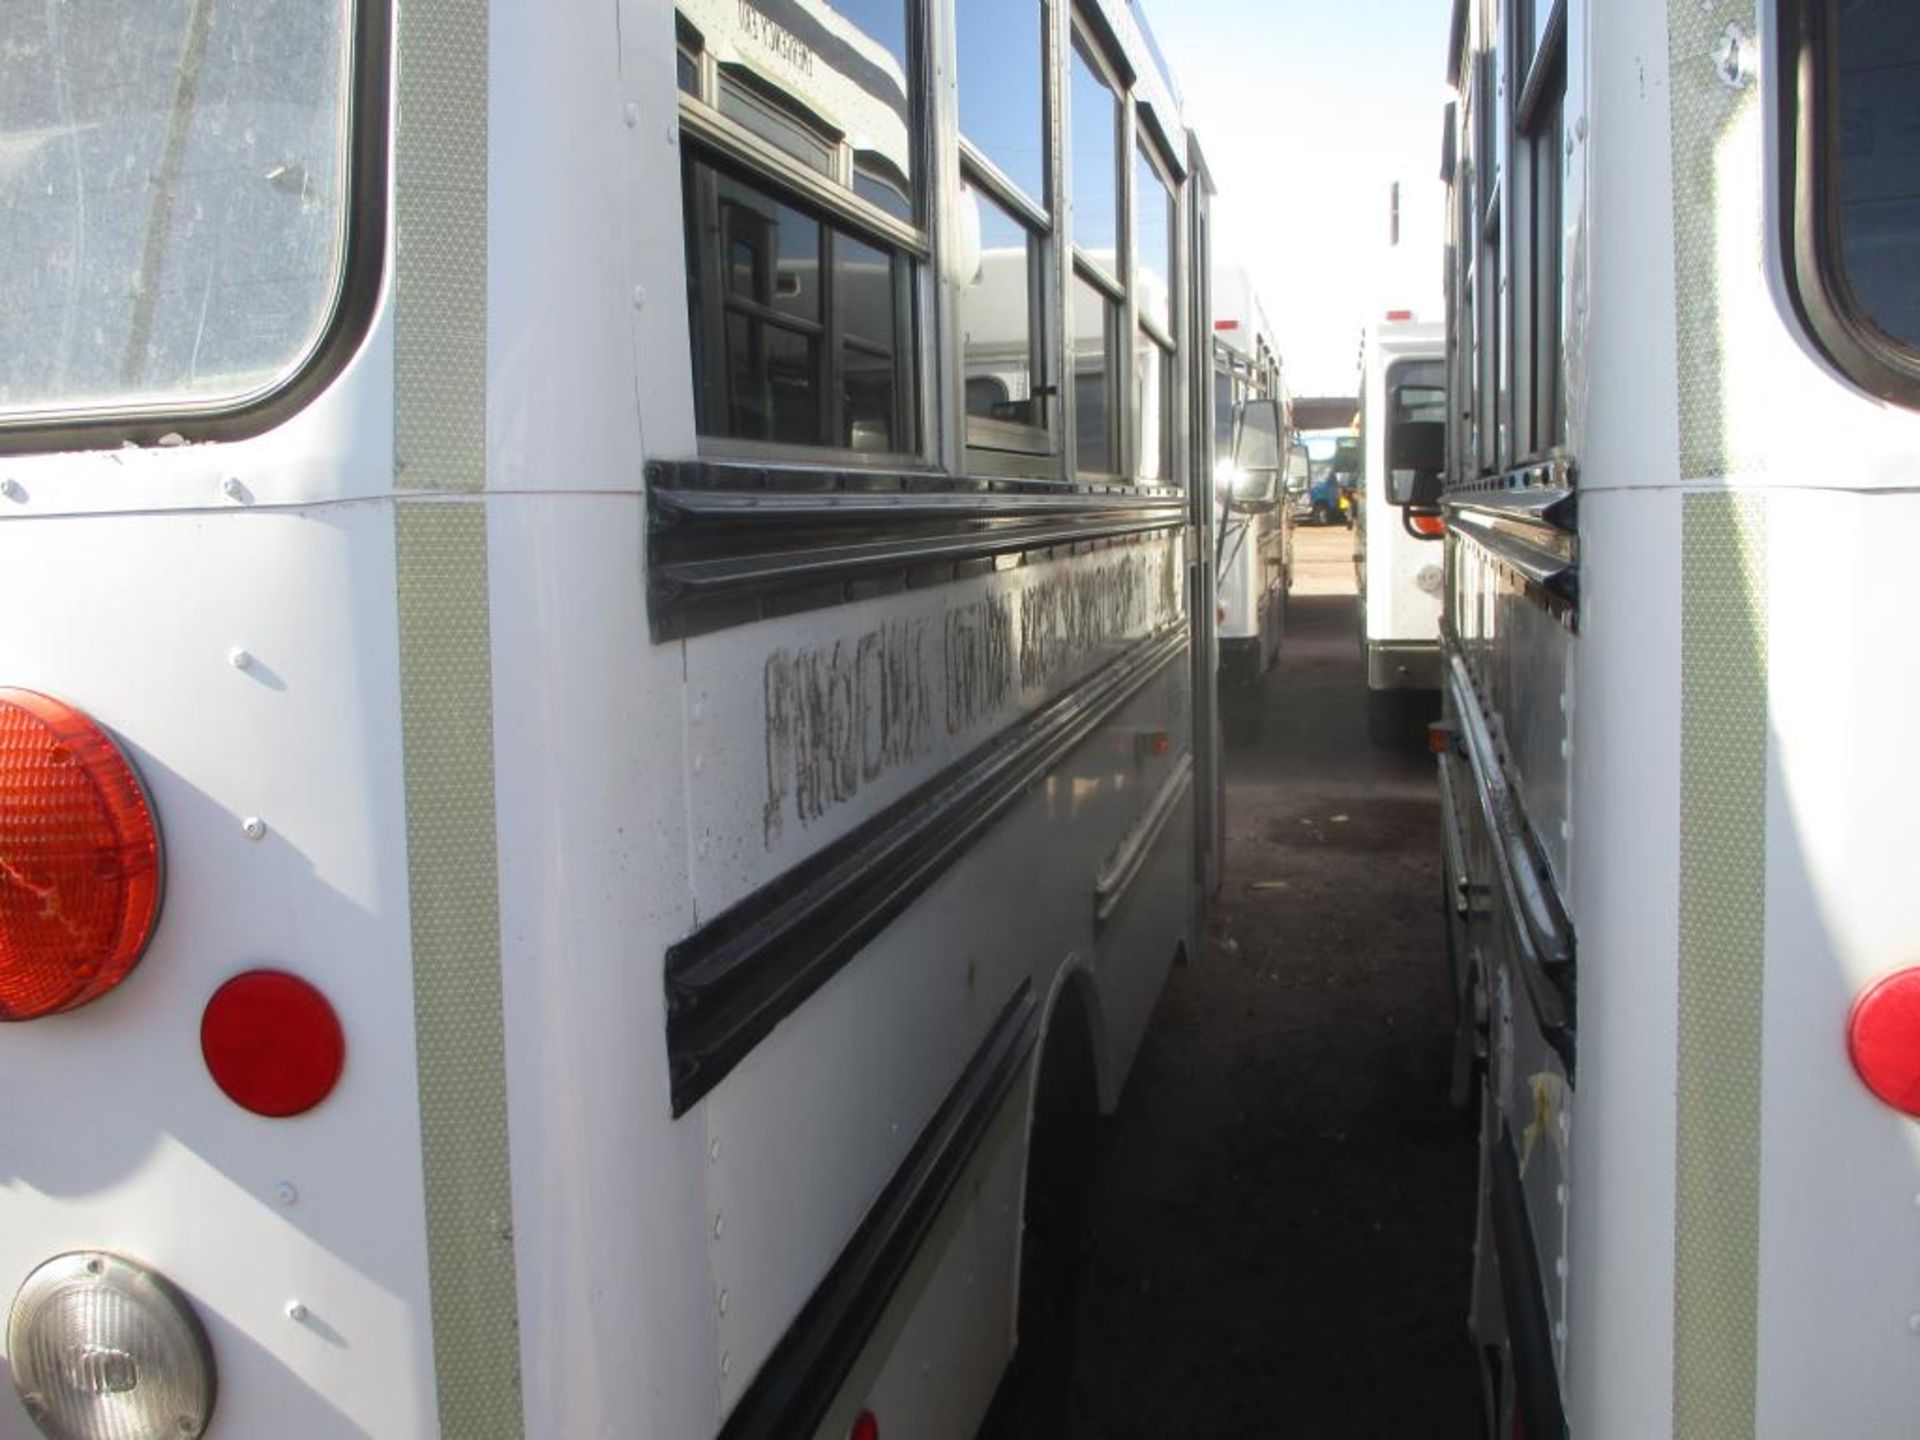 (Lot # 3920) - 2008 Ford E-Series School Bus - Image 5 of 13